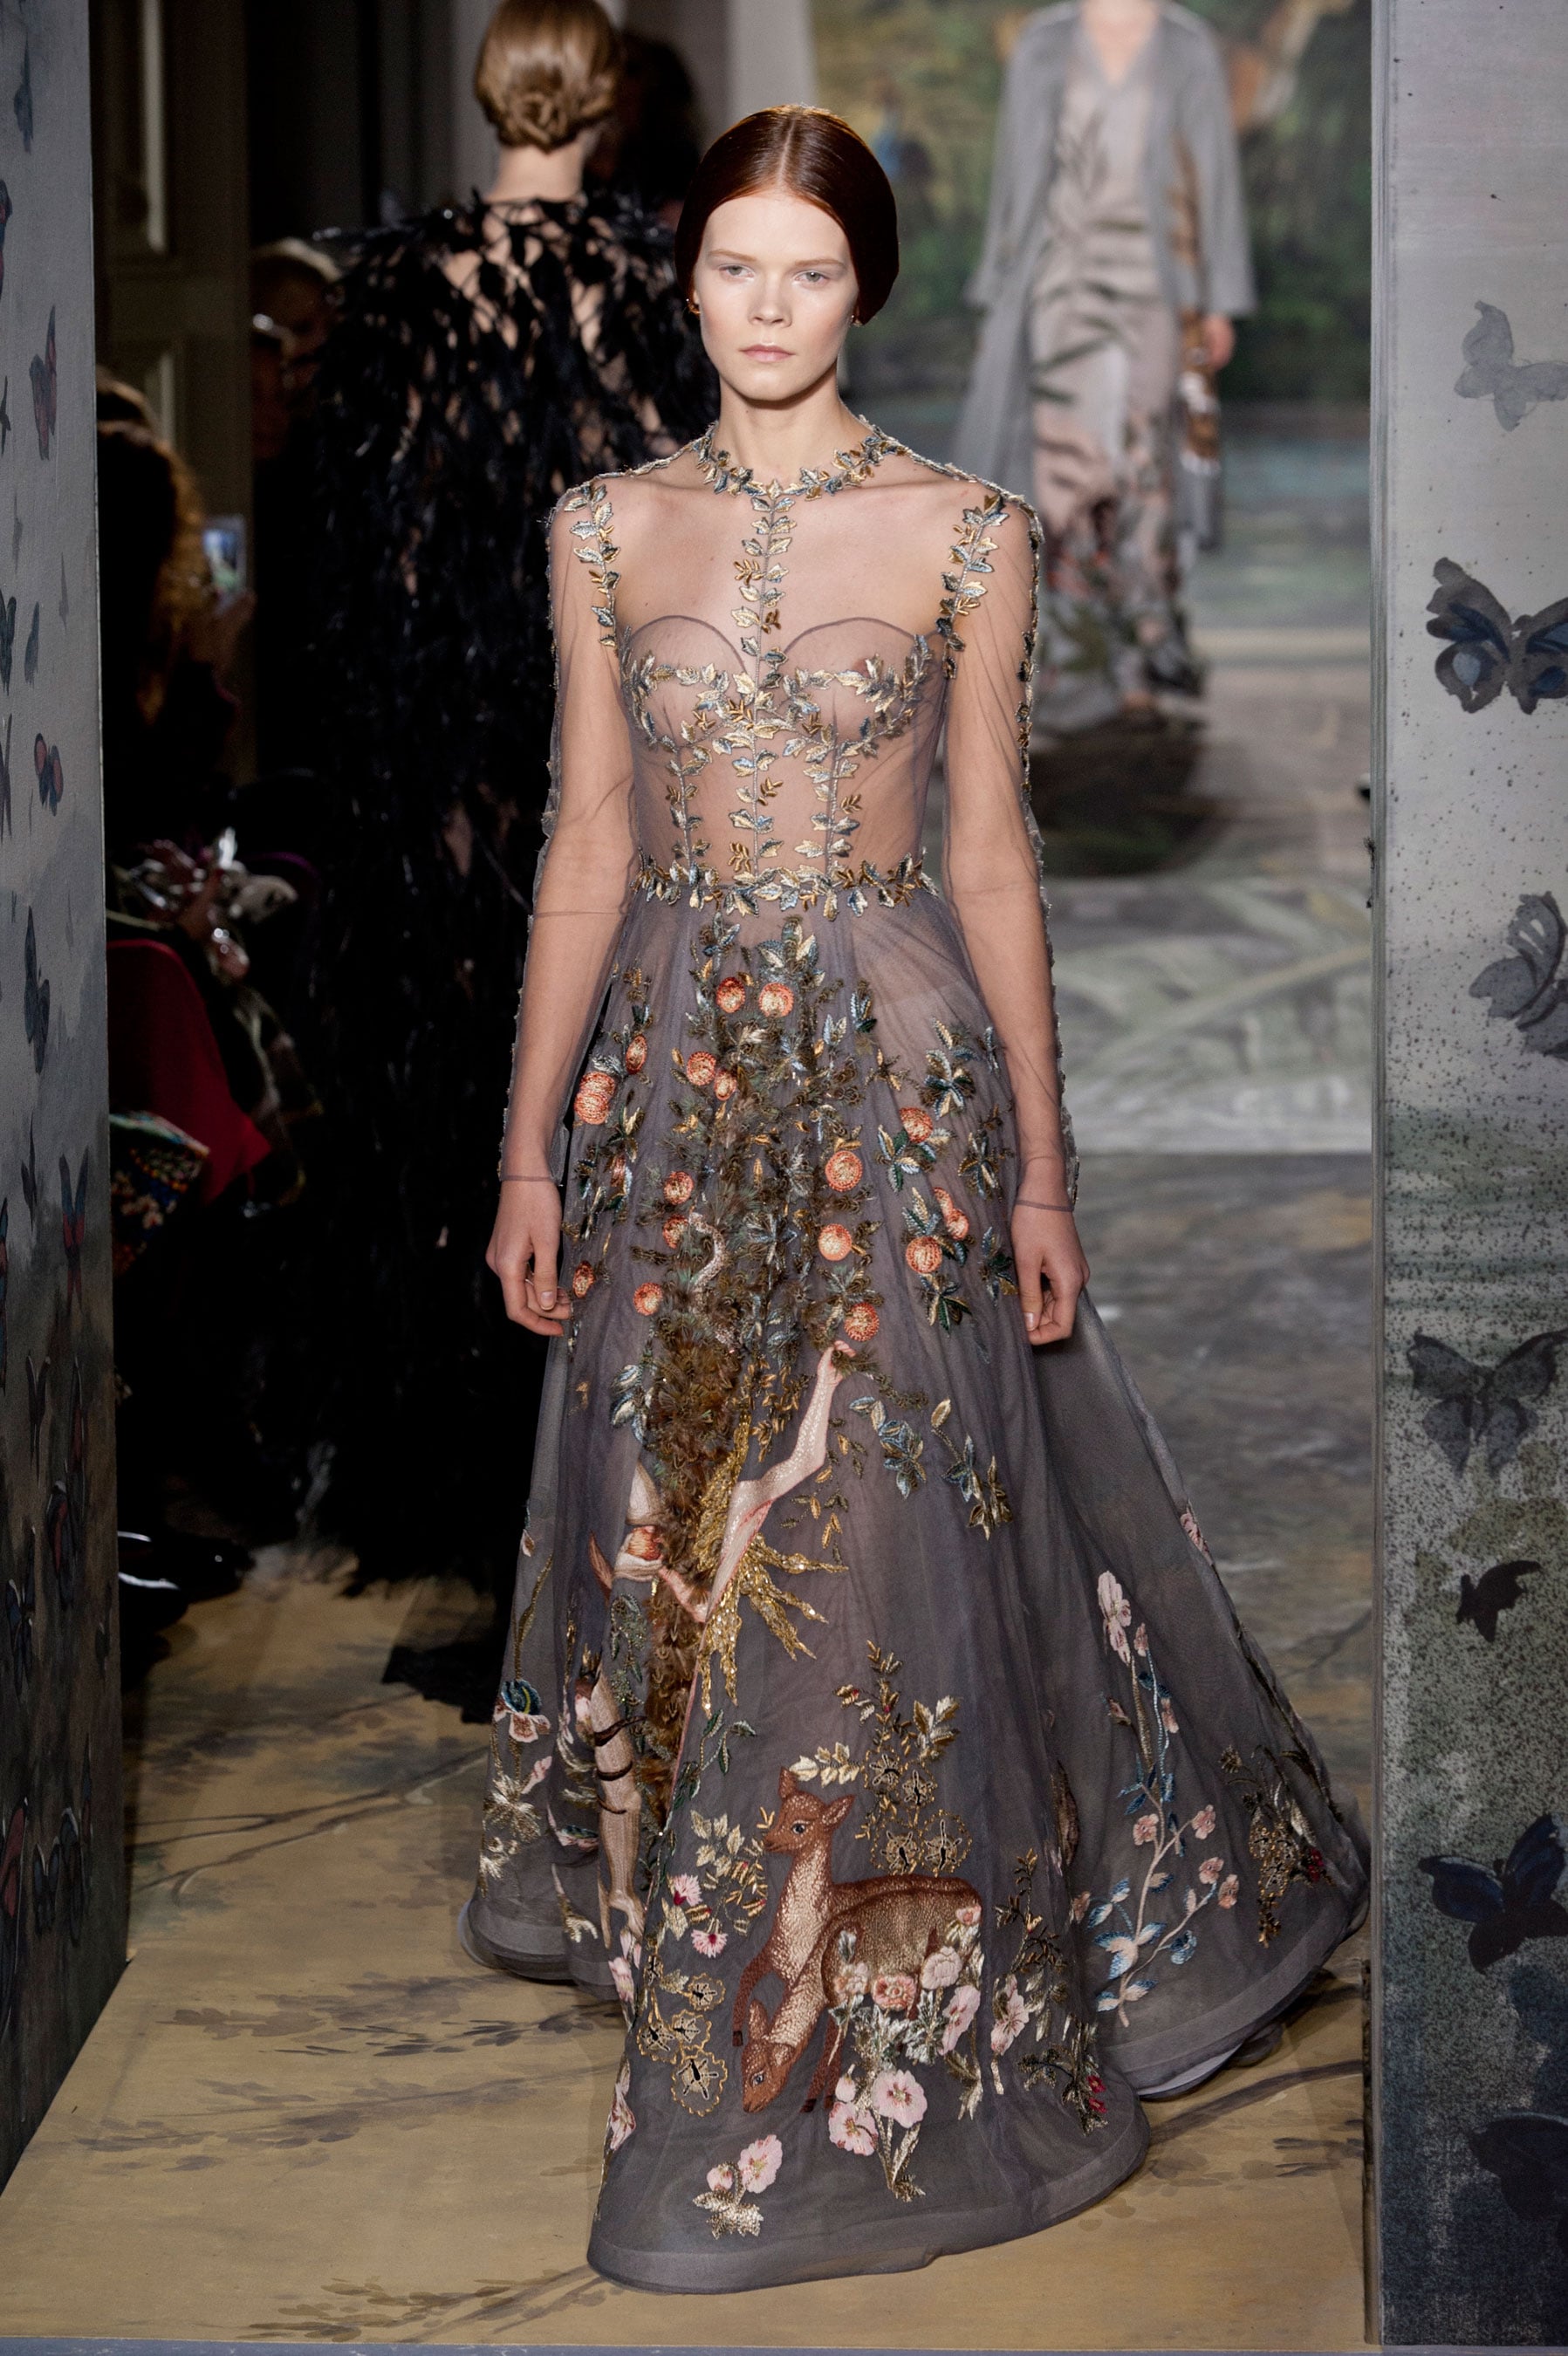 Valentino Haute Couture Spring 2014 | Valentino Couture Gives Us a Whole Other Kind Swan Song | POPSUGAR Fashion Photo 4